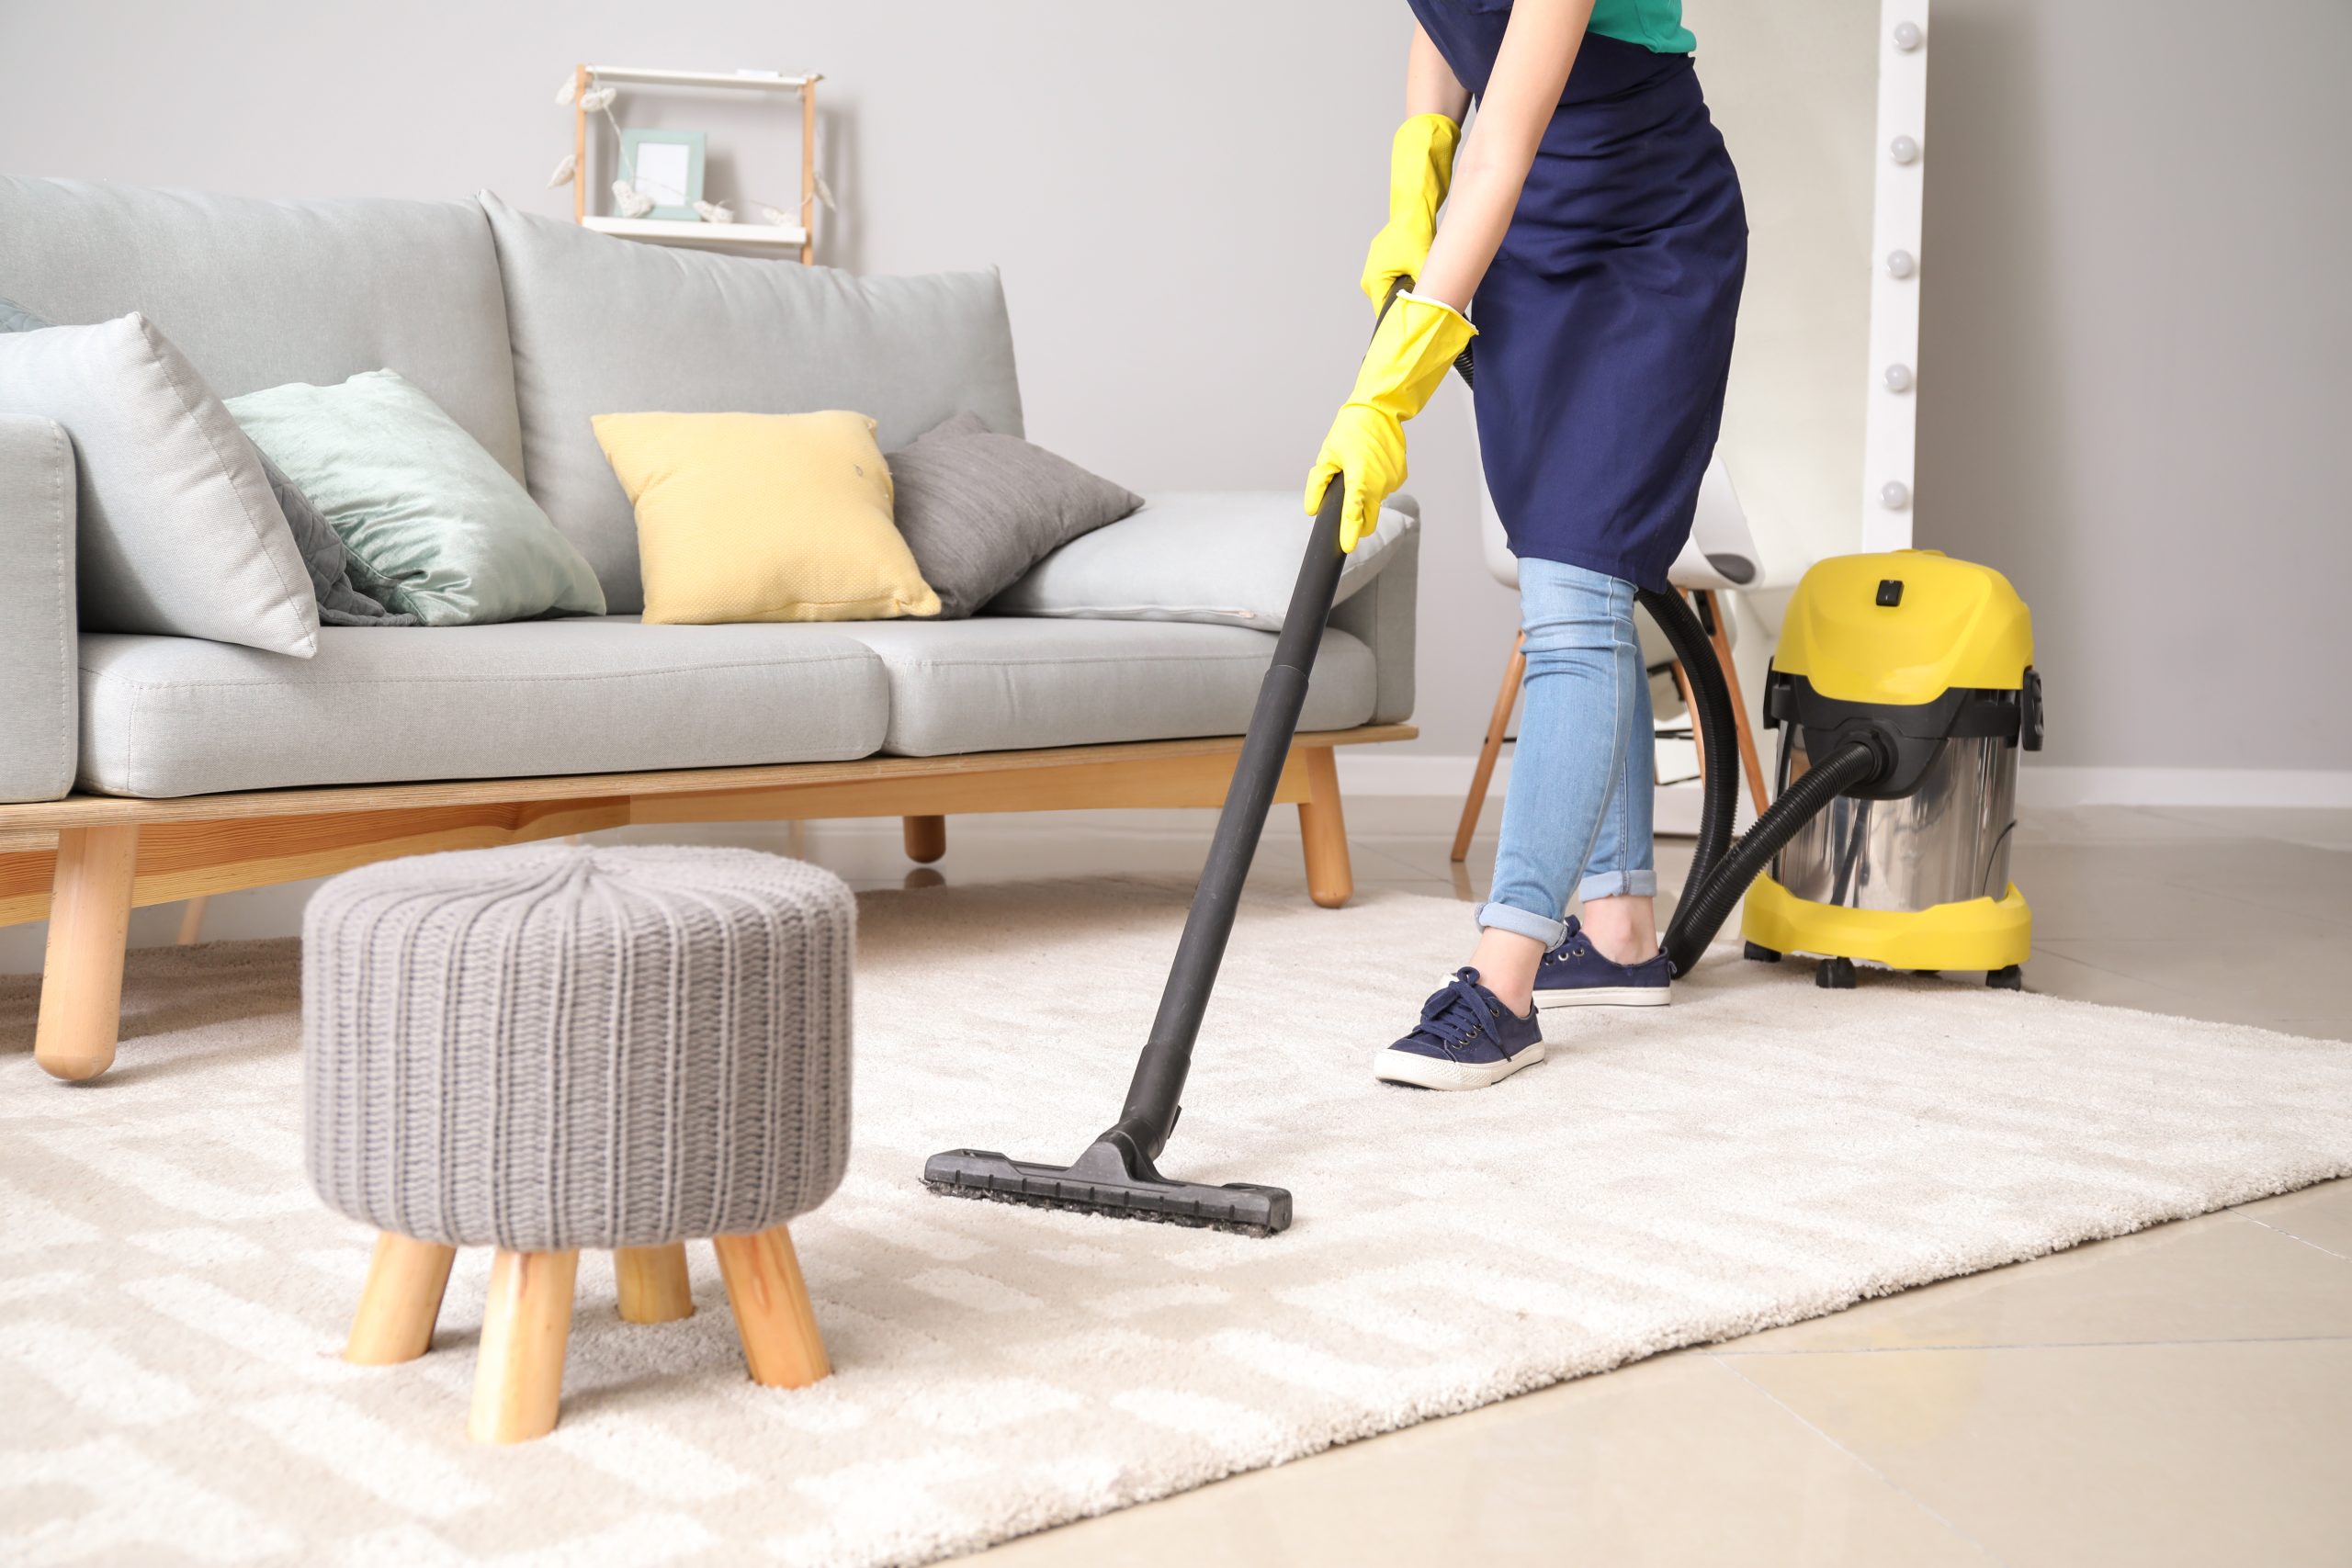 Are there any restrictions on the size or type of property you clean? faq - Cleaning Services in Edmonton